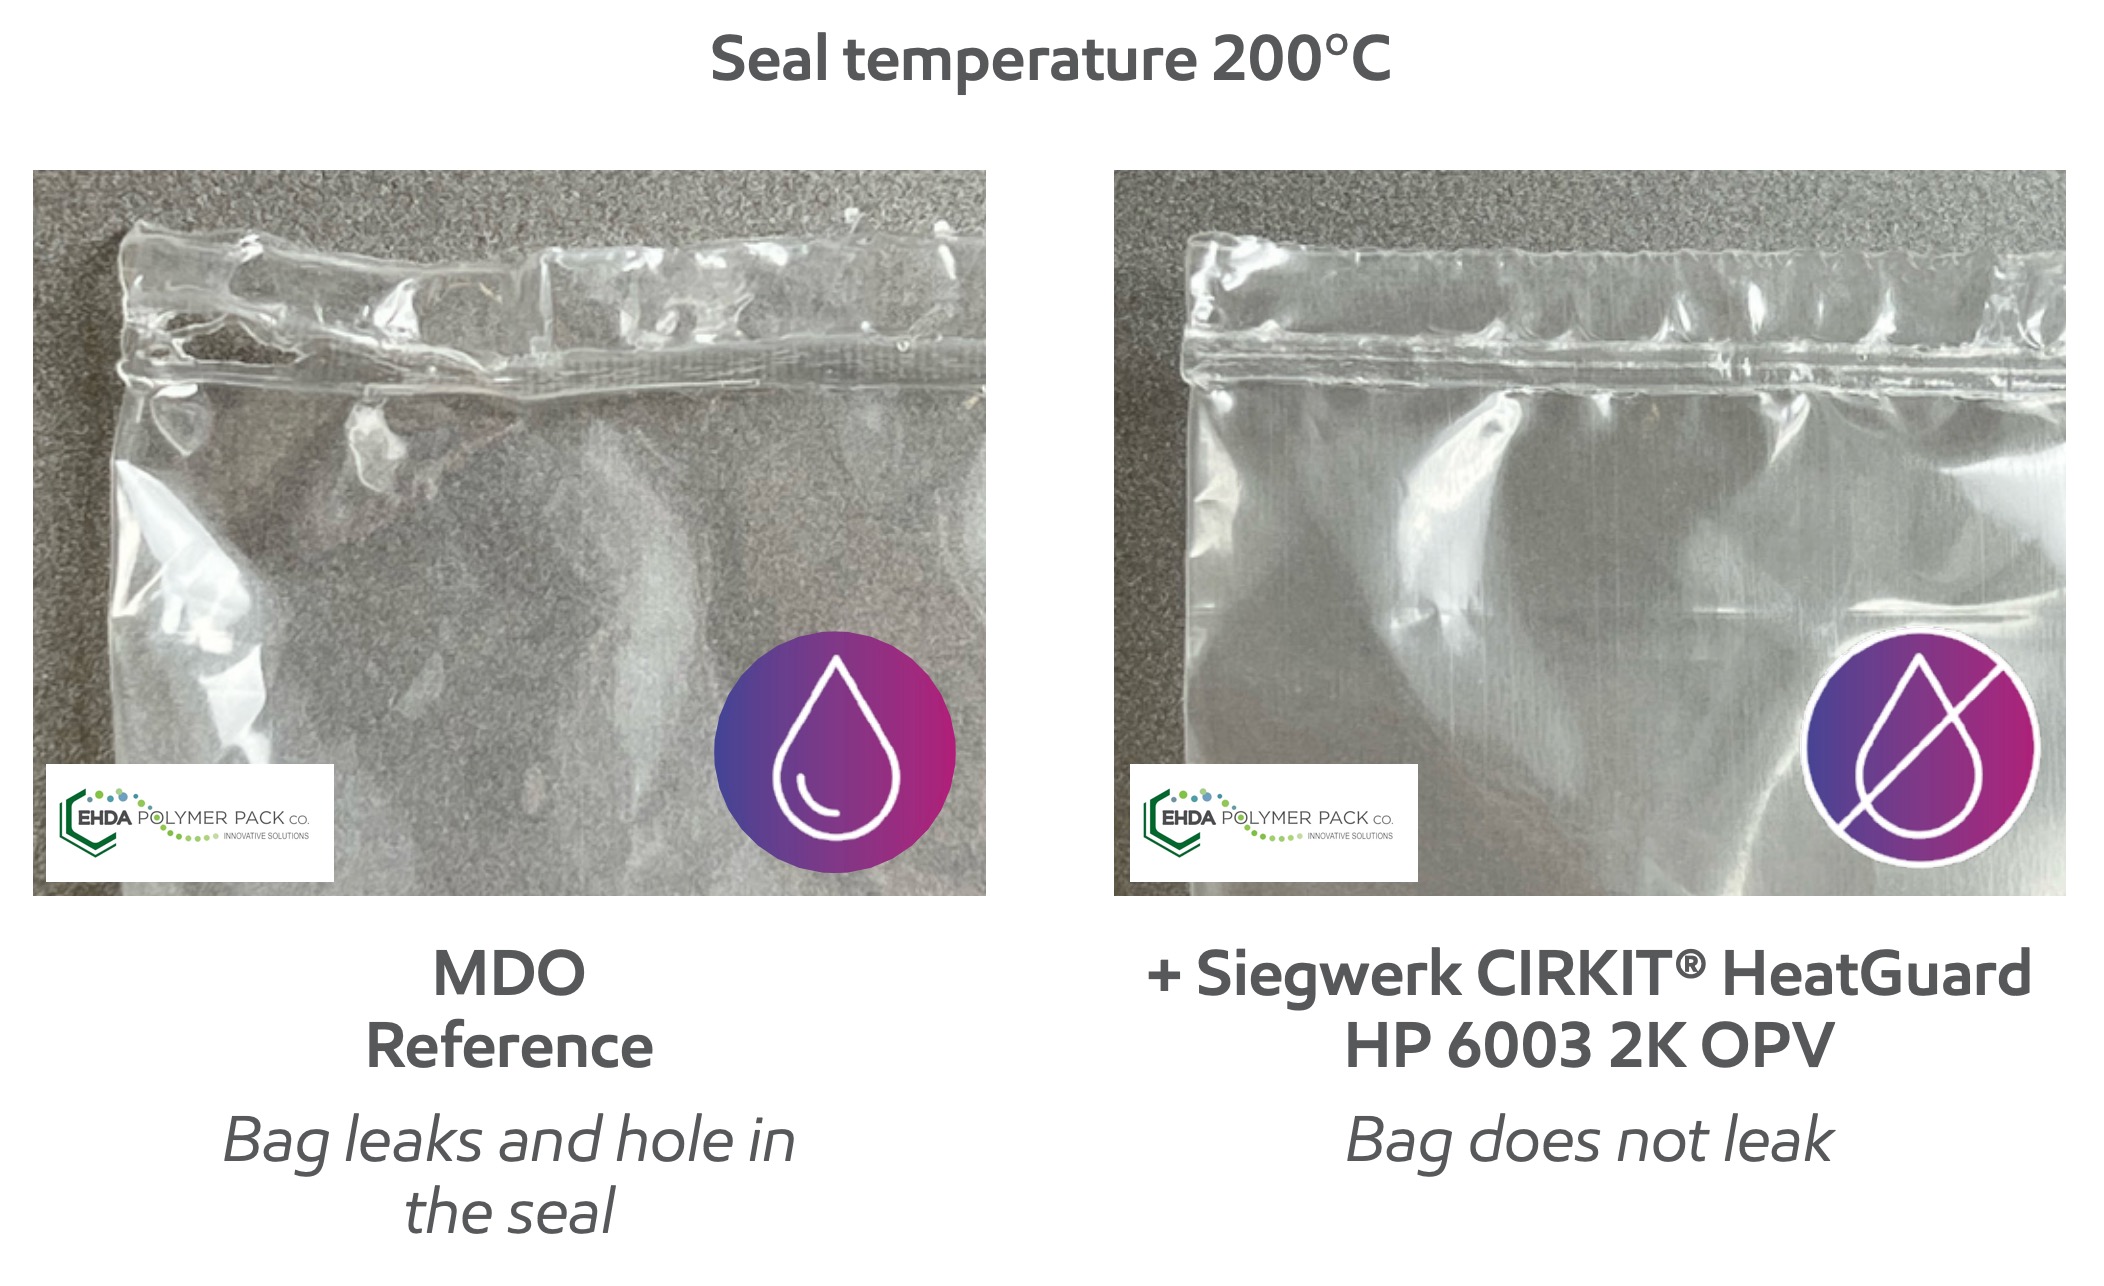 Recyclable and heat resistant flexible packaging